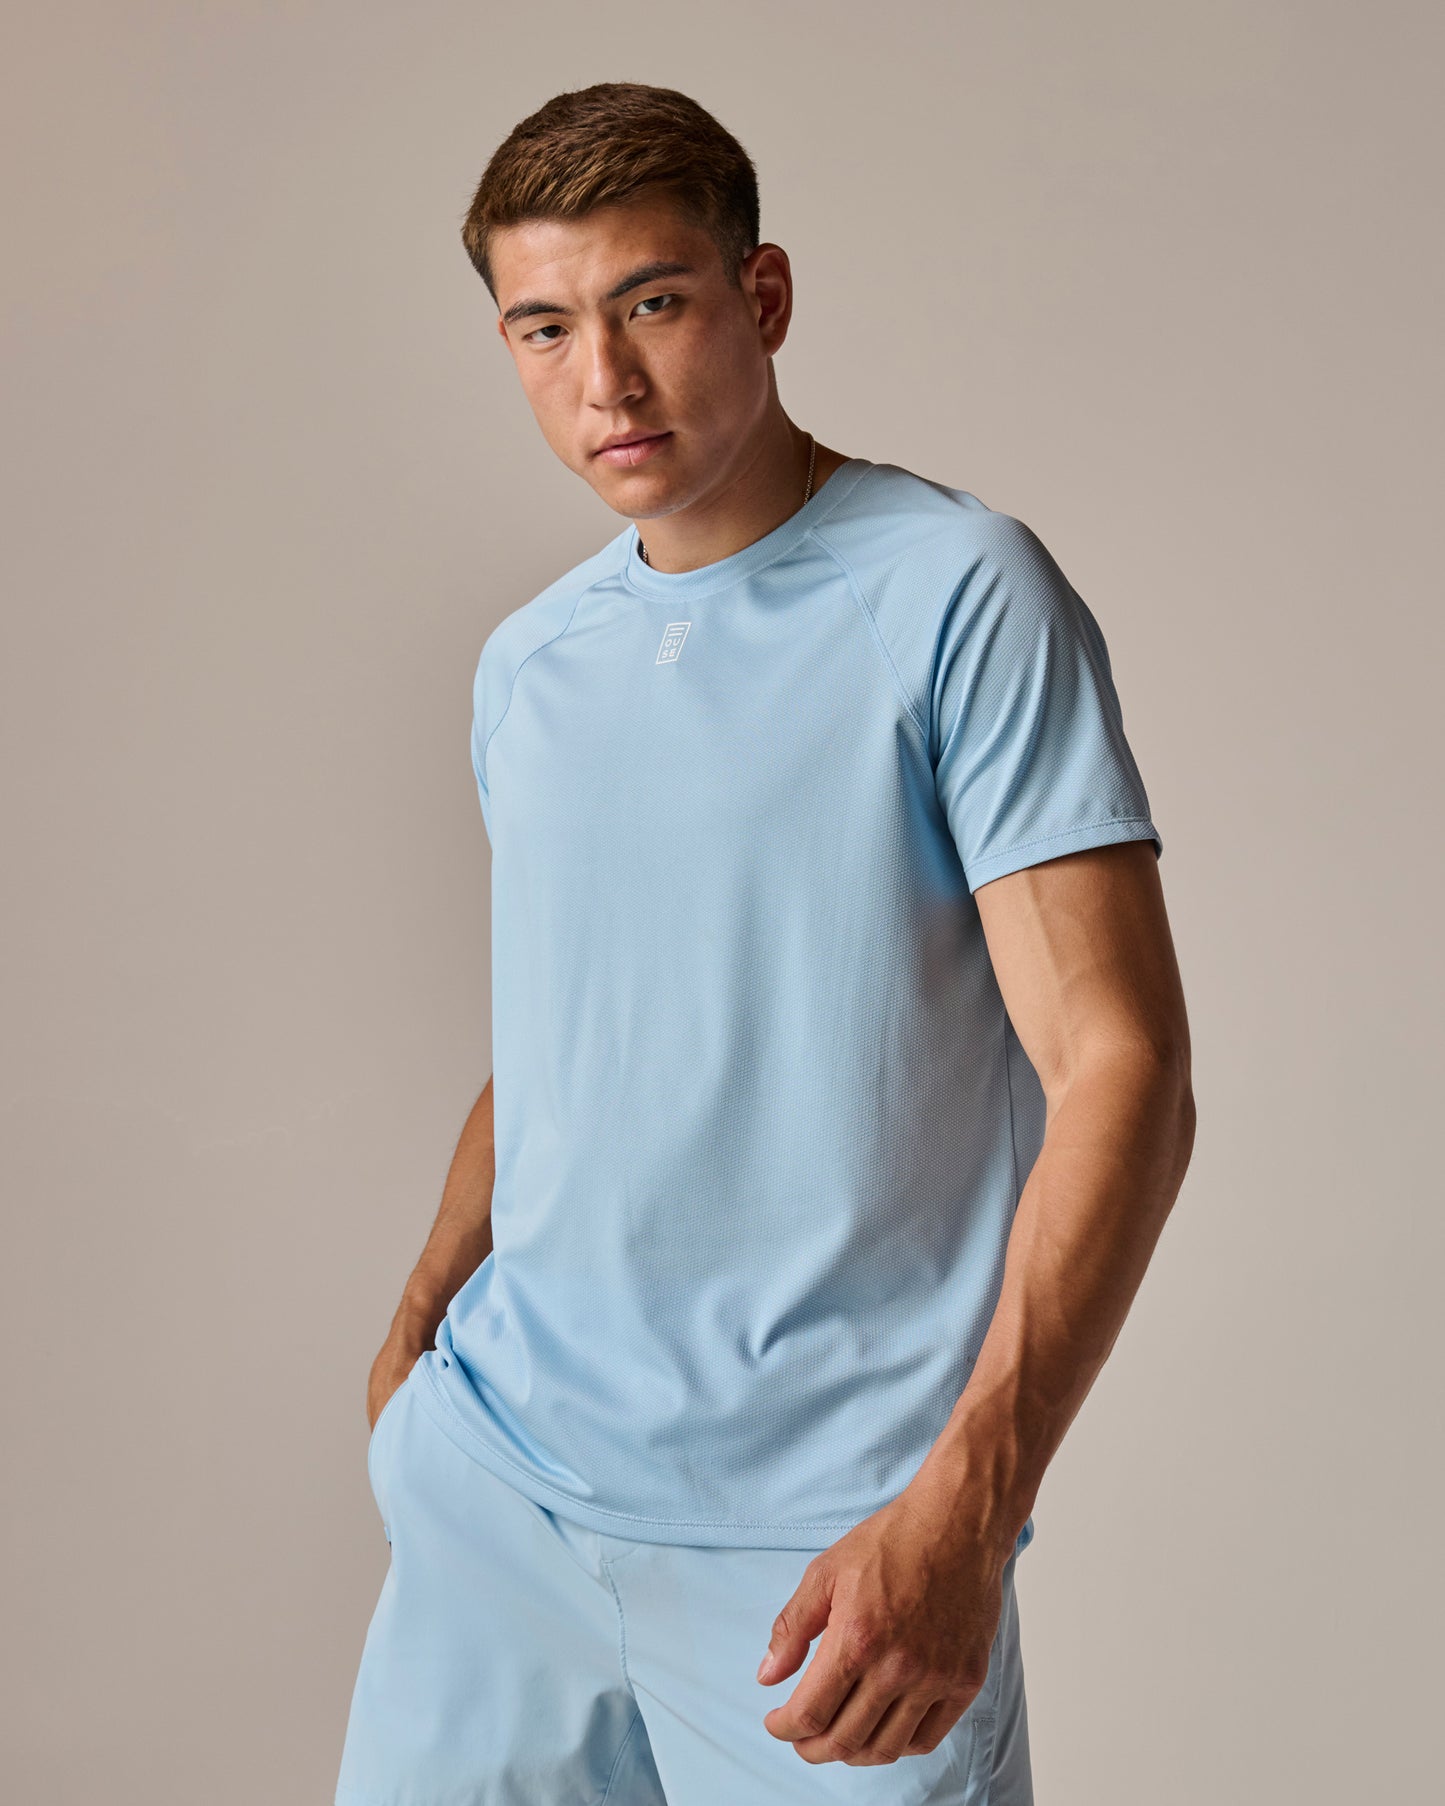 Mens Athletic Sports T-Shirt in Sky Blue